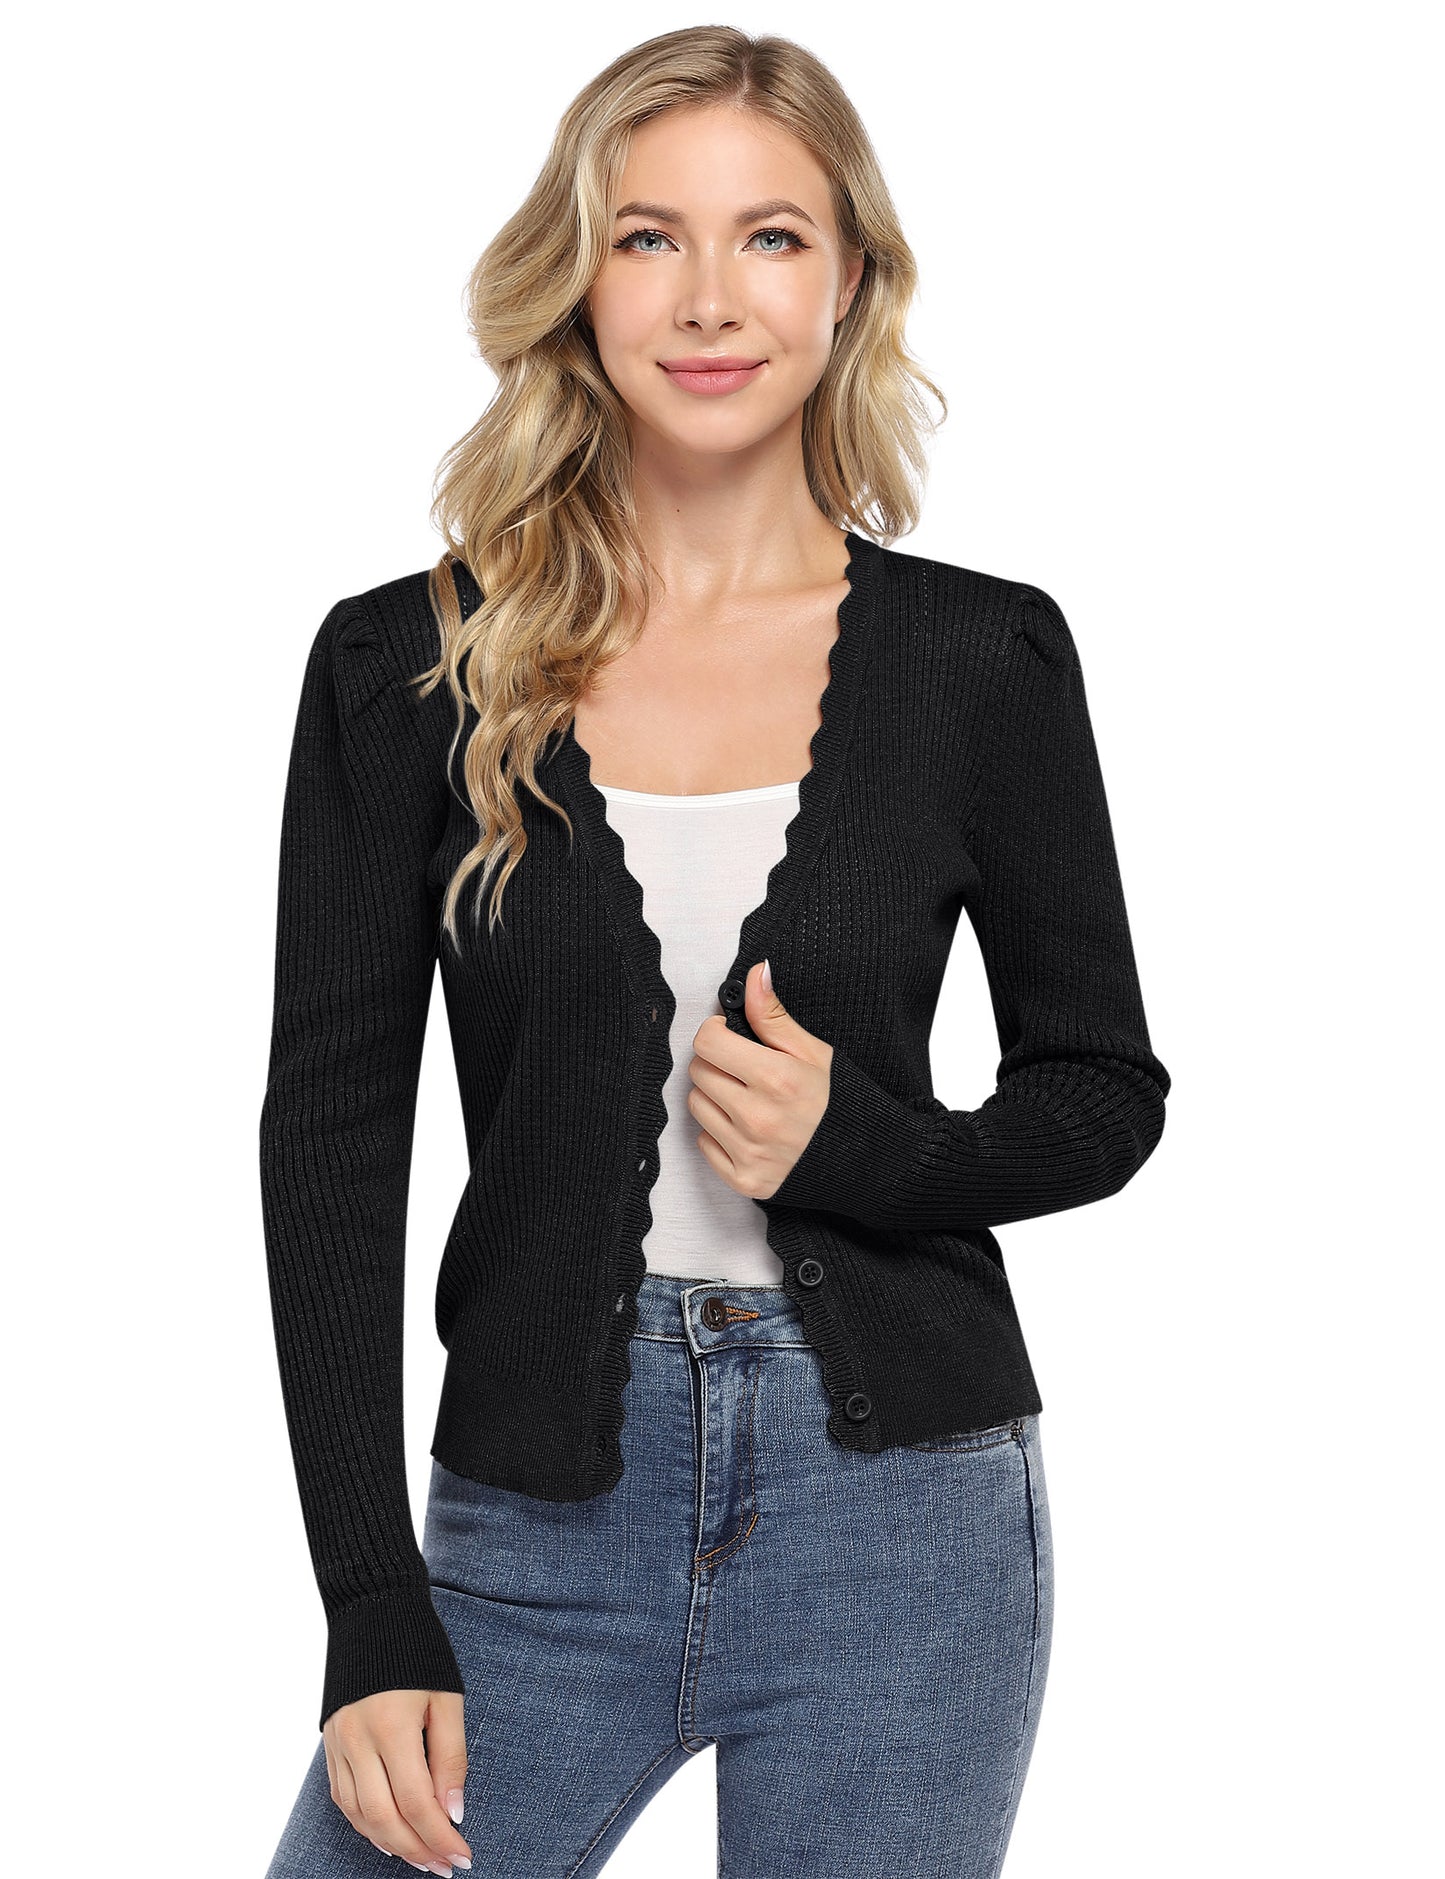 YESFASHION Women's Cropped Button Cardigan Sweaters